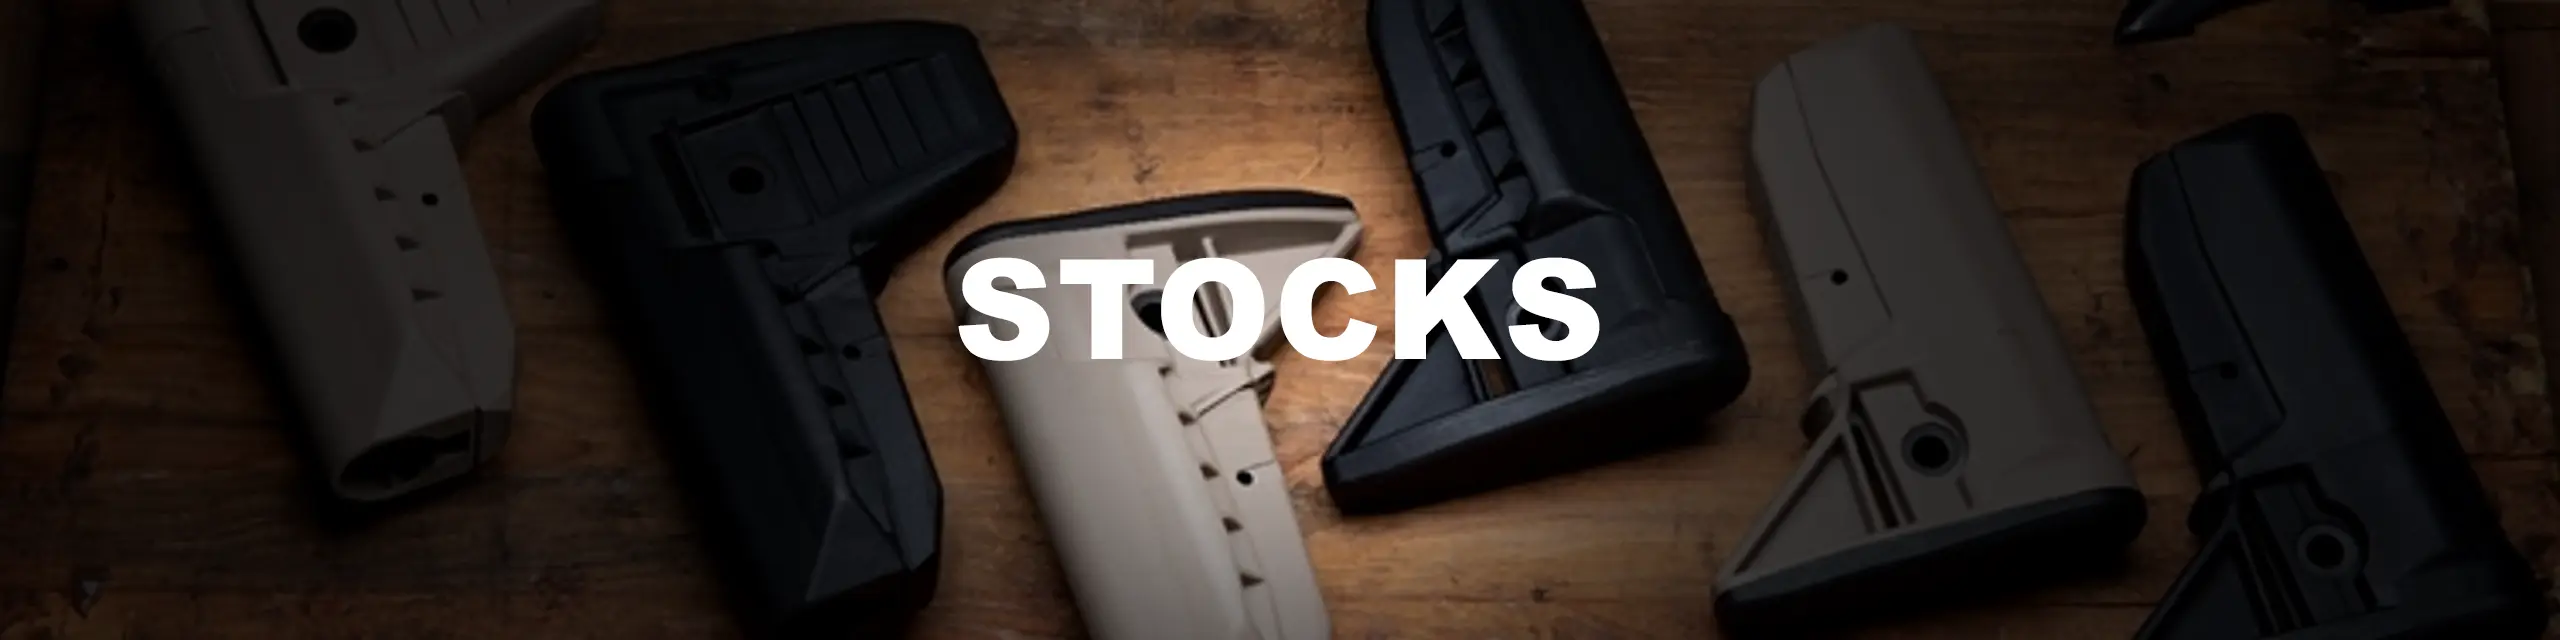 Weapon stocks offered by East Texas Gunner